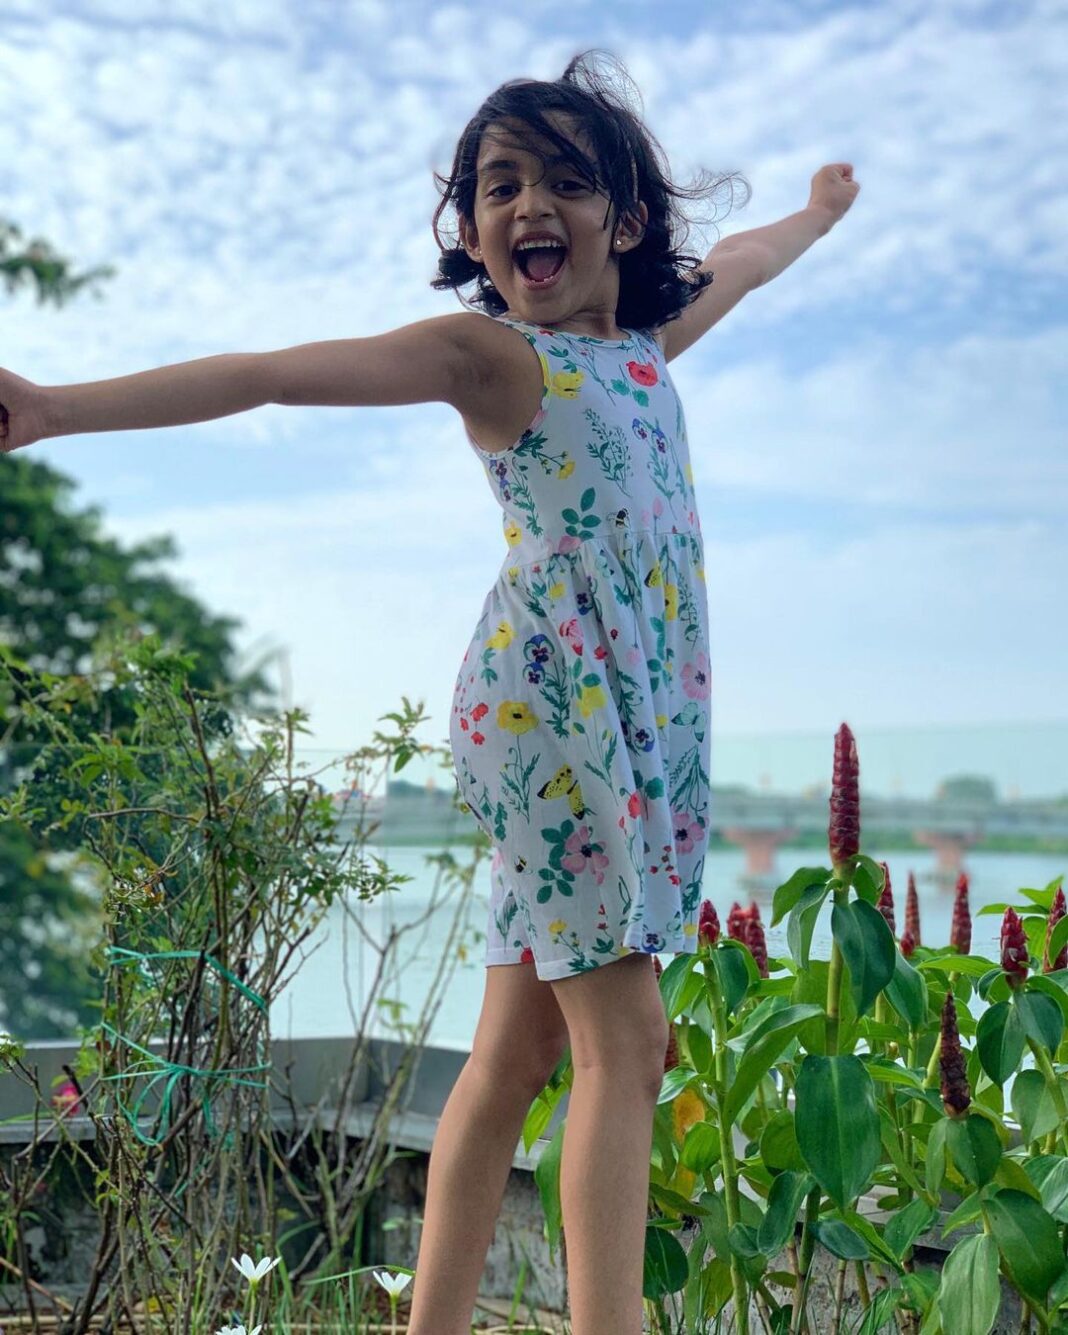 Prithviraj Sukumaran Instagram - Happy birthday sunshine! You will forever be Daada’s and Mamma’s biggest joy and brightest light. A part of me wishes you wouldn’t grow up so soon, but another part of me is so much in awe of the person you’re growing up to be! I hope you continue to be full of surprises and never stop loving the world the way you do! I love you baby girl! PS: Thank you all for the love and wishes 😊❤️